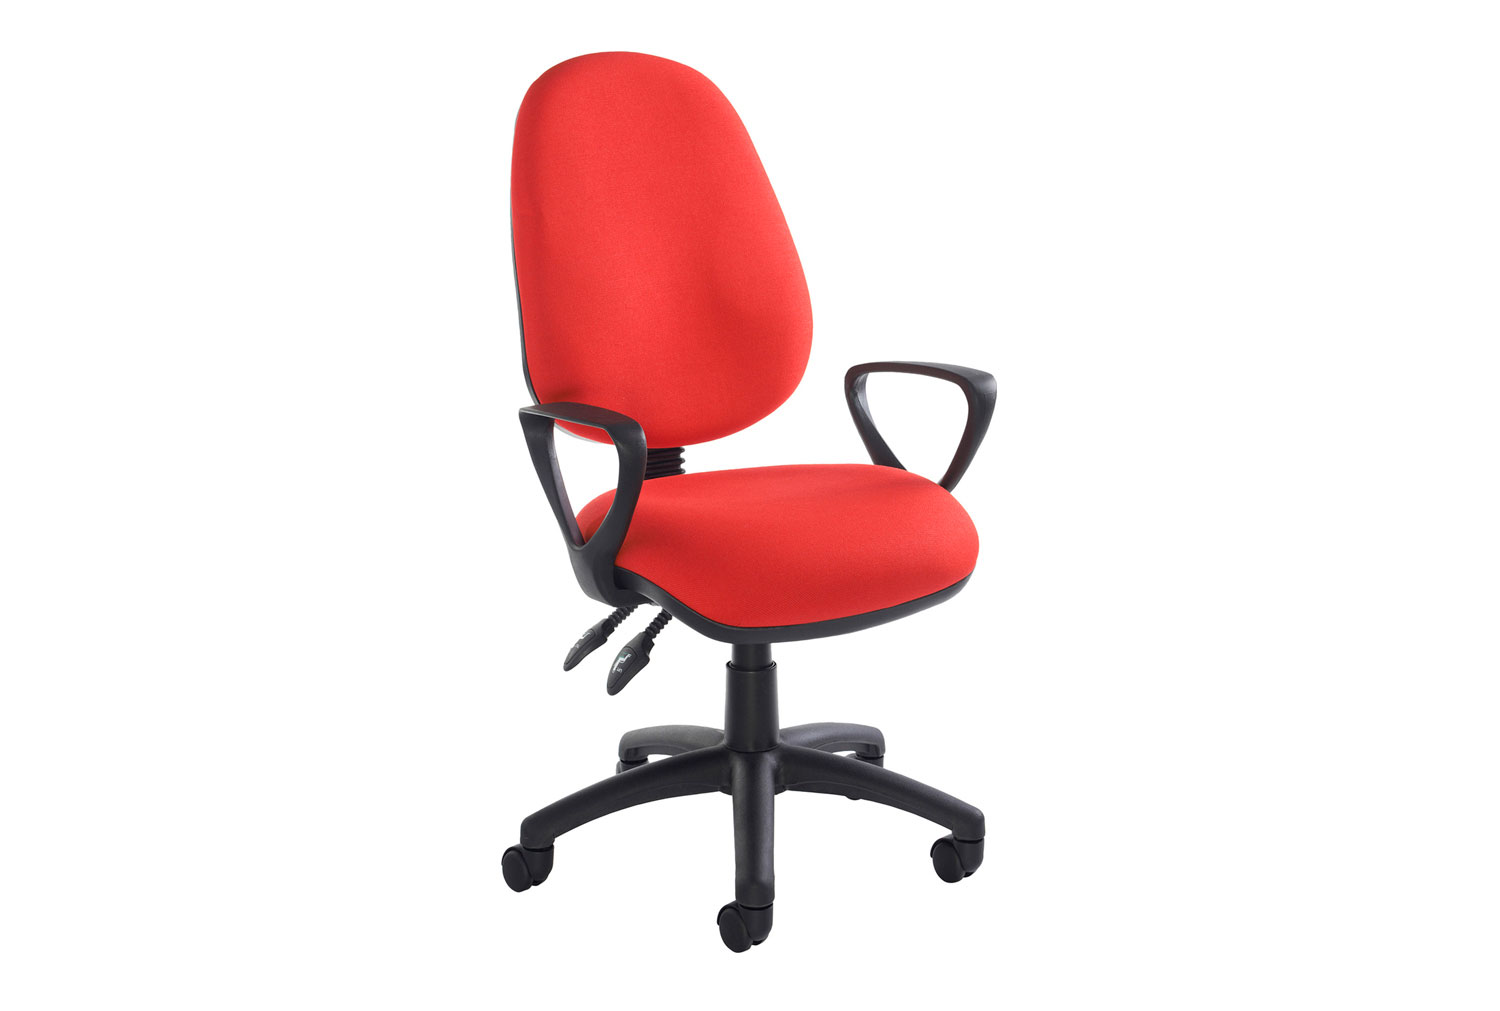 Full Lumbar 2 Lever Operator Office Chair With Fixed Arms, Red, Express Delivery